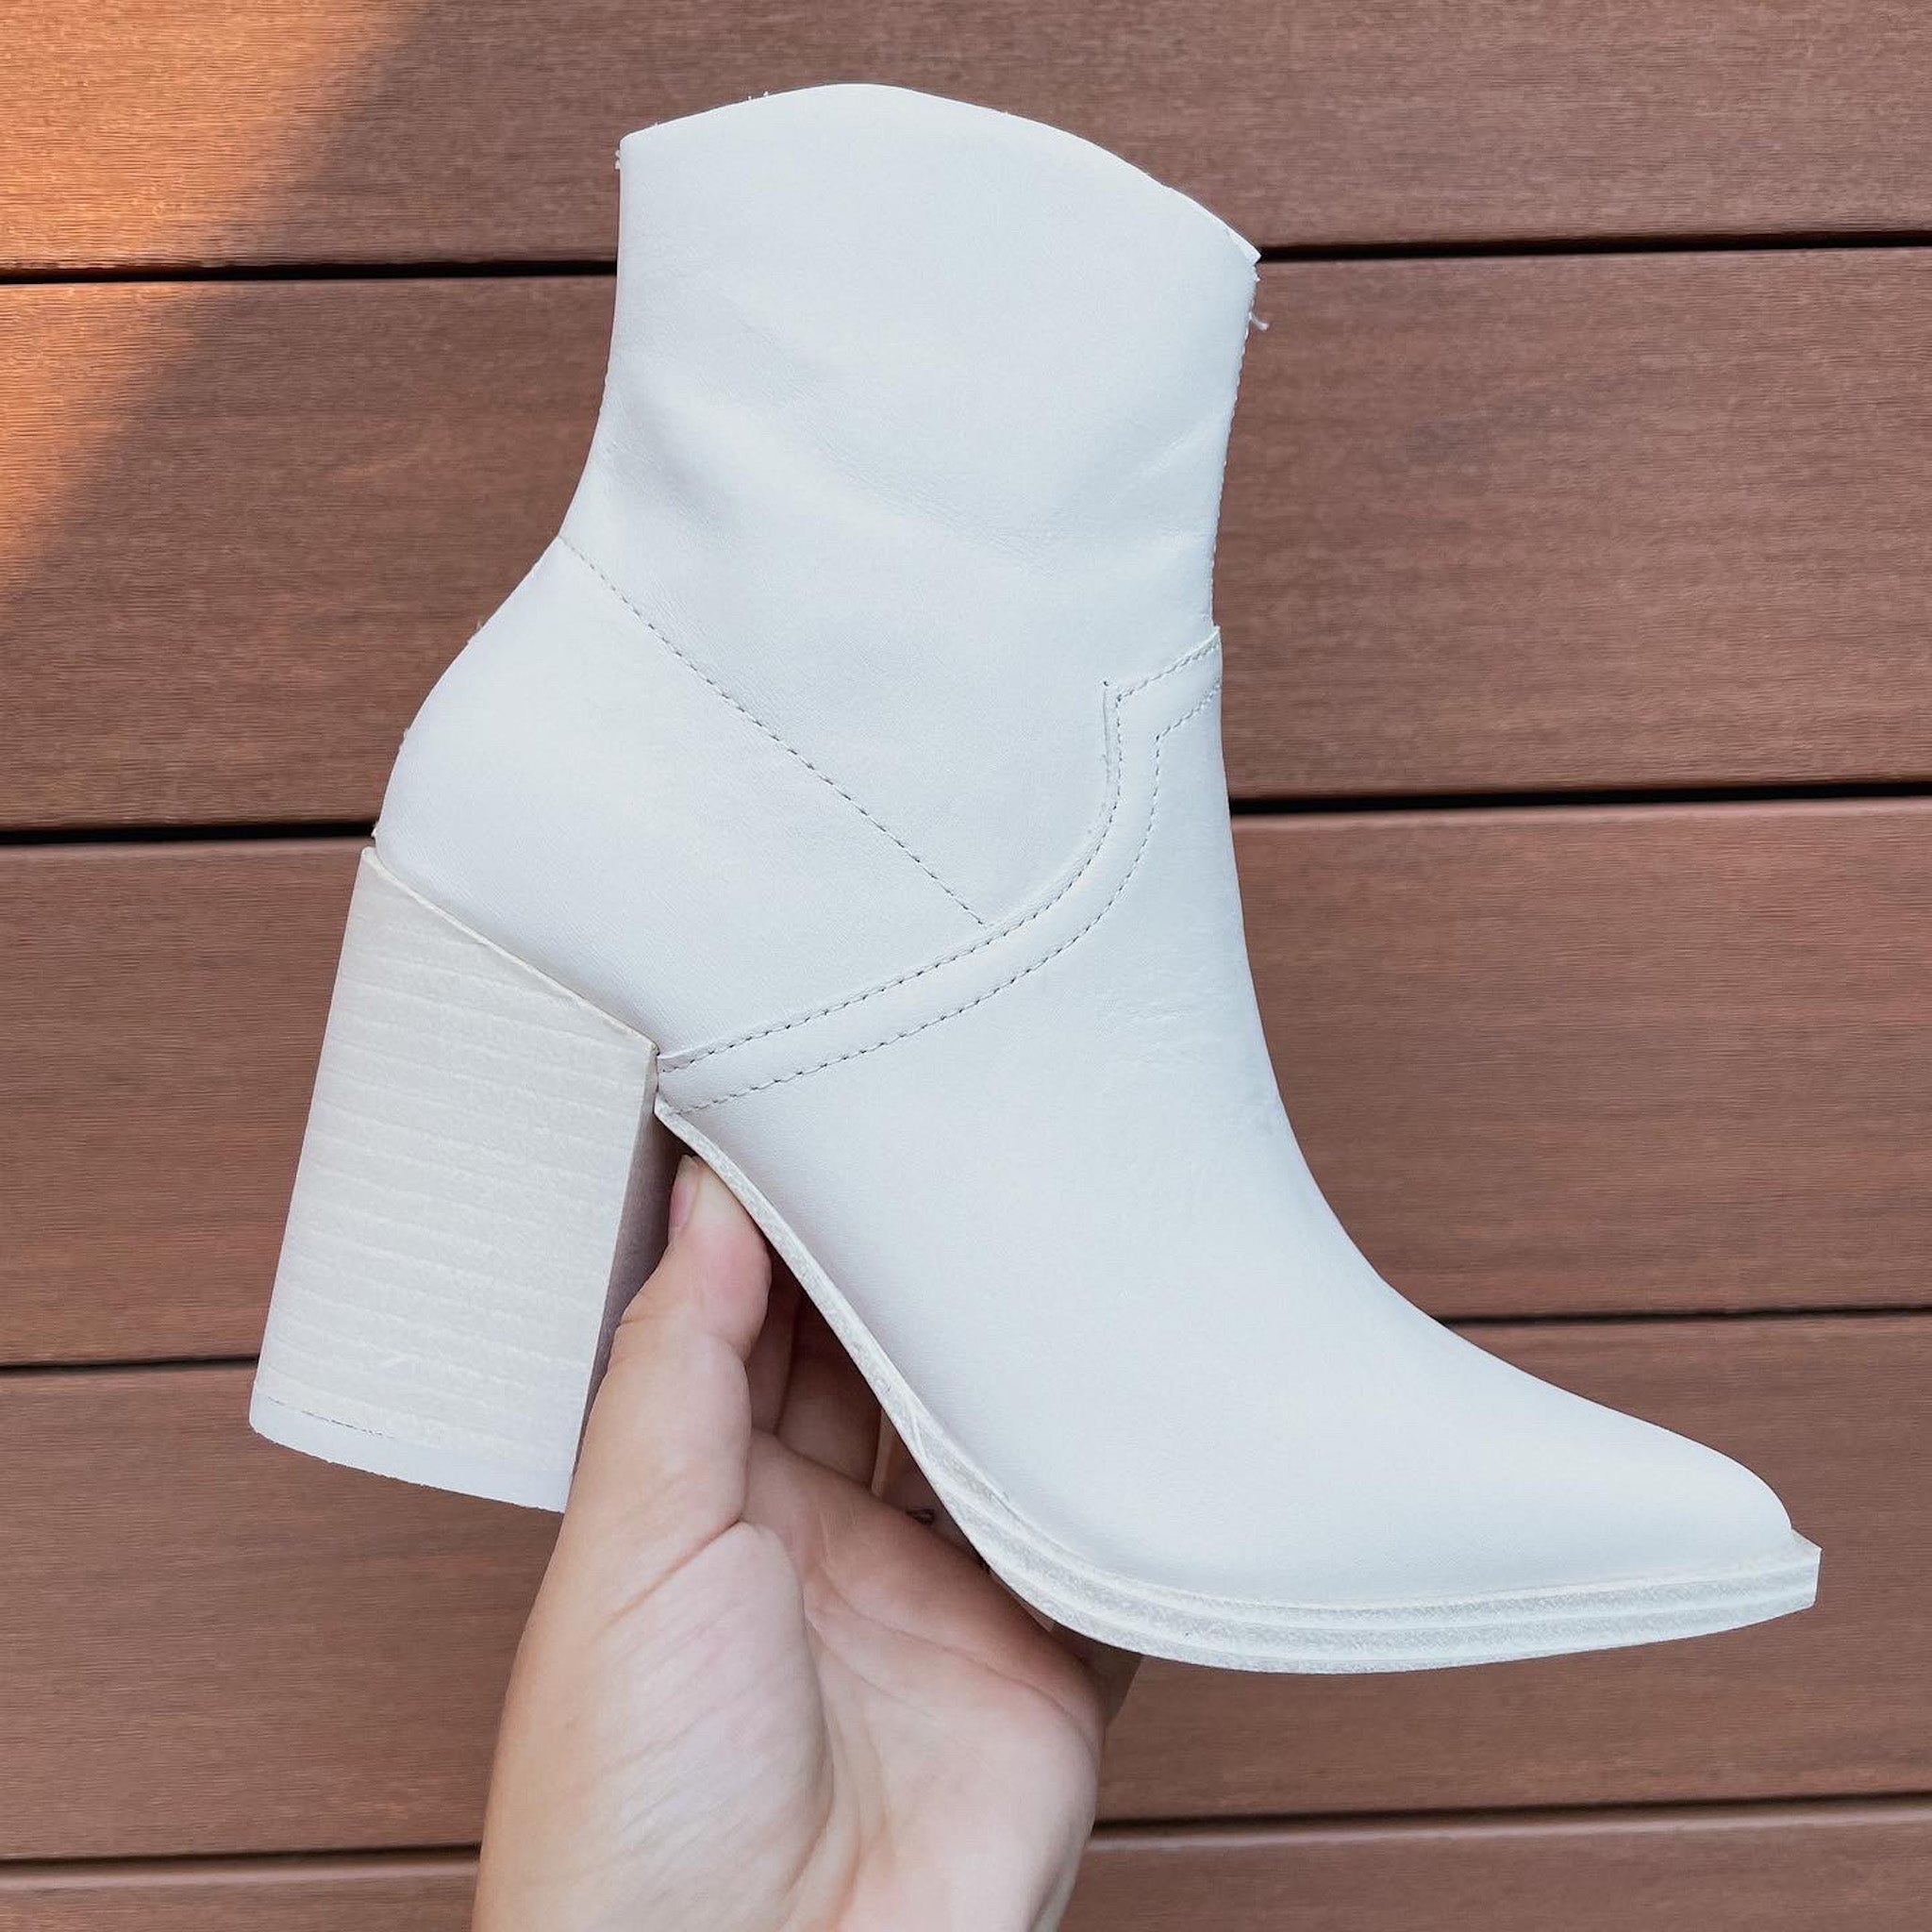 Steve Madden Cate Bootie - Bone Leather